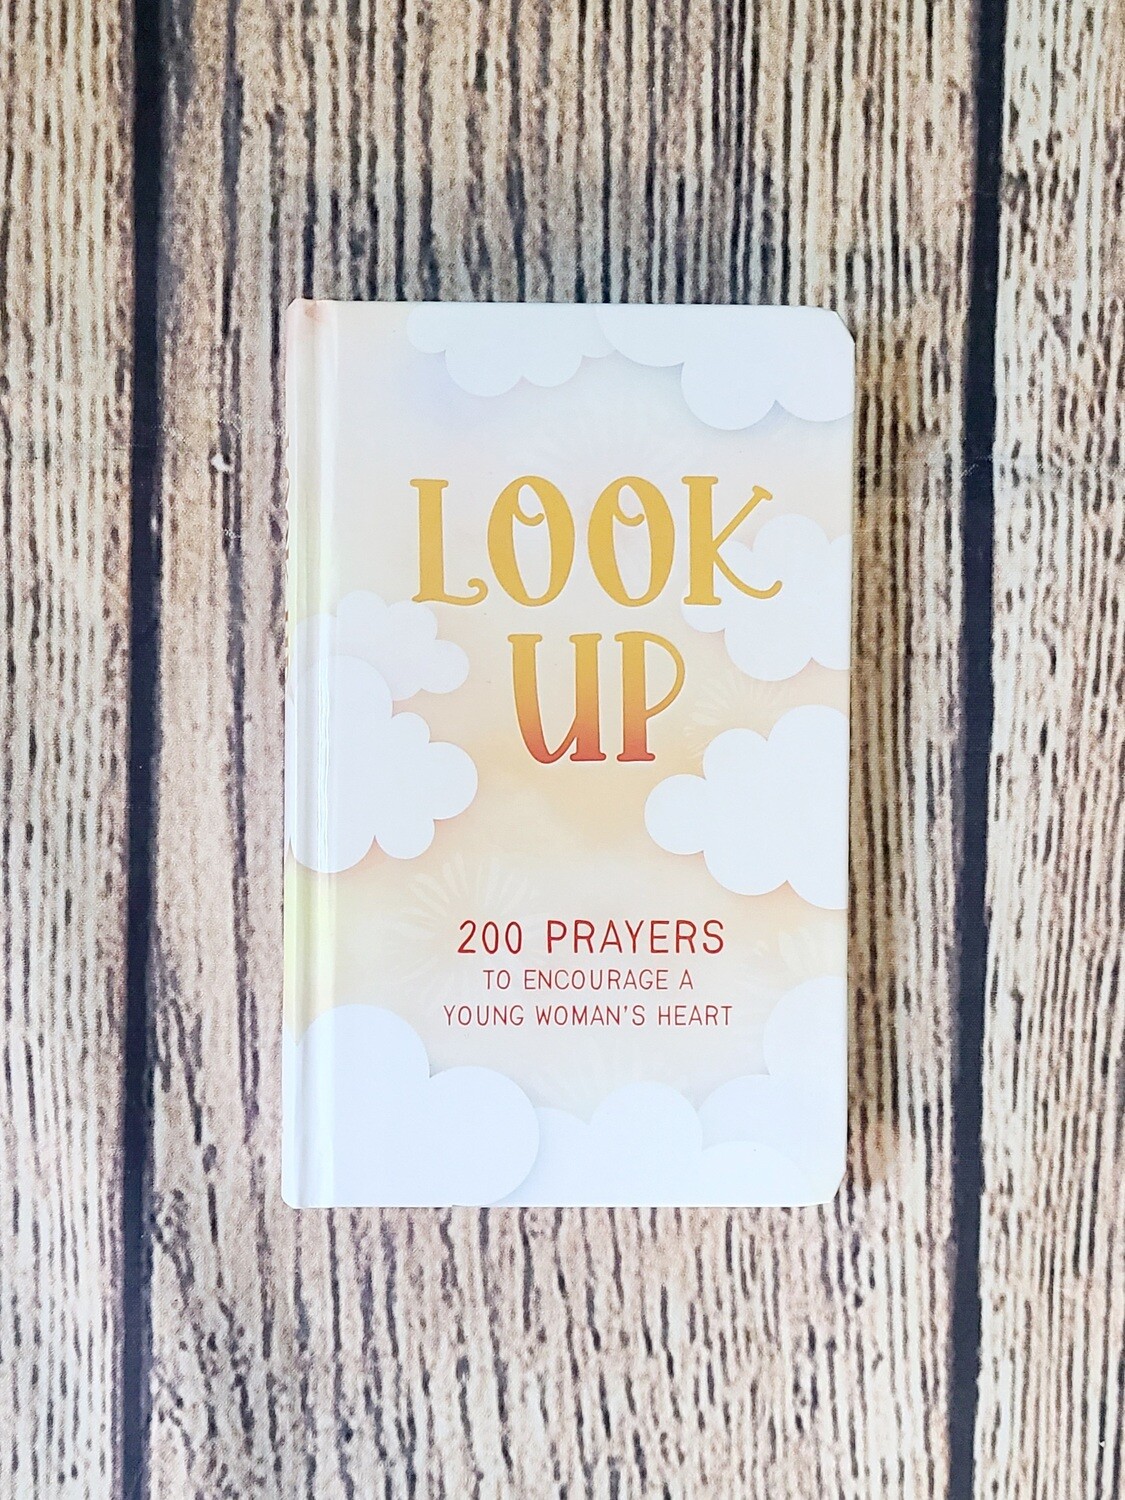 Look Up: 200 Prayers to Encourage A Young Woman's Heart by Hilary Bernstein - Hardback - New